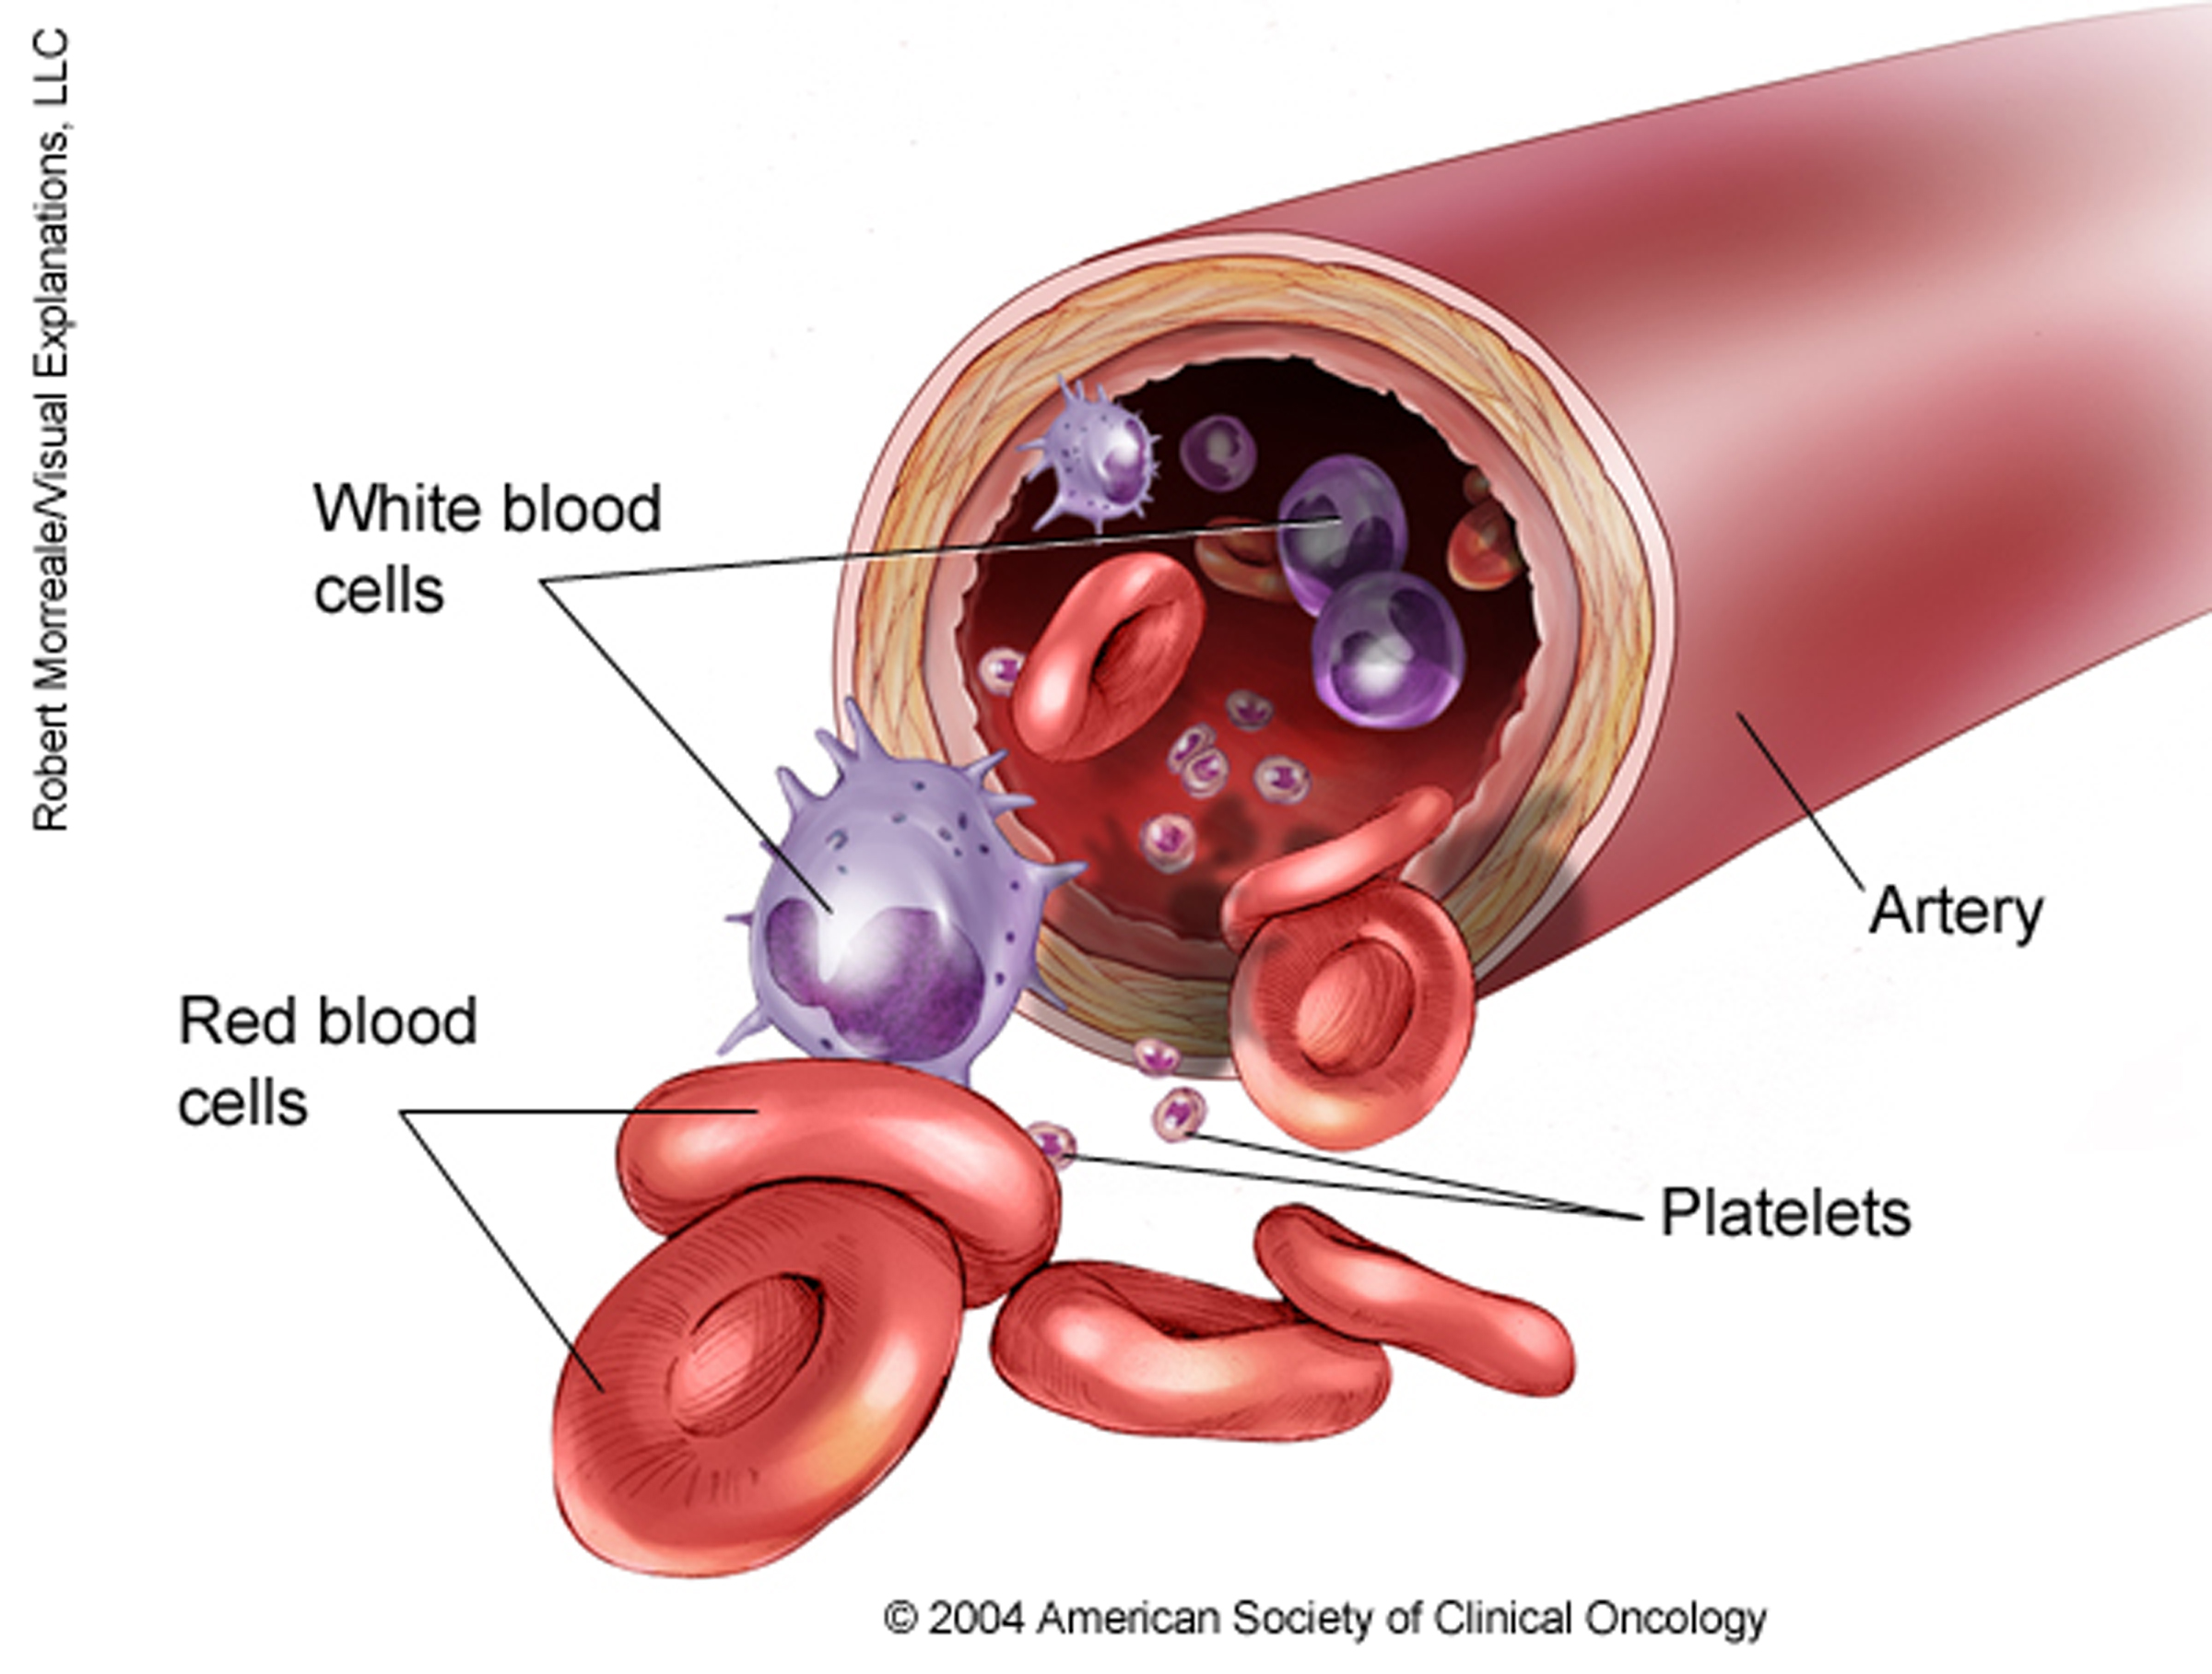  Illustration of the cells in the blood. See description for more information.